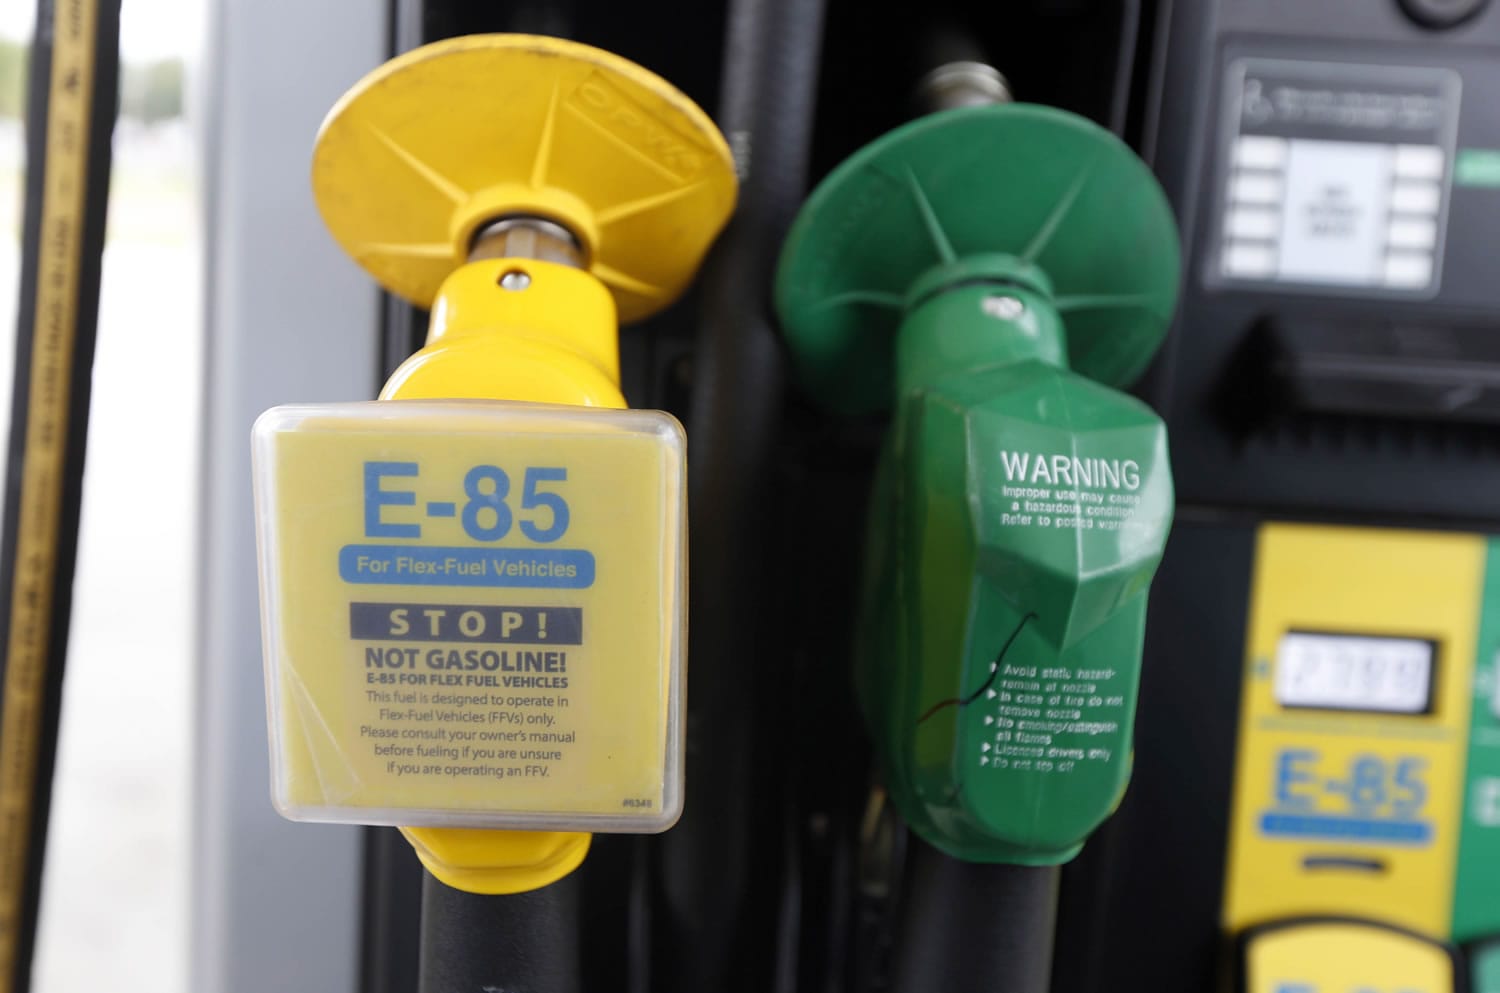 A fuel nozzle for E-85, left, and traditional gasoline is seen at a gas station in Batesville, Miss. (AP Photo/Rogelio V.